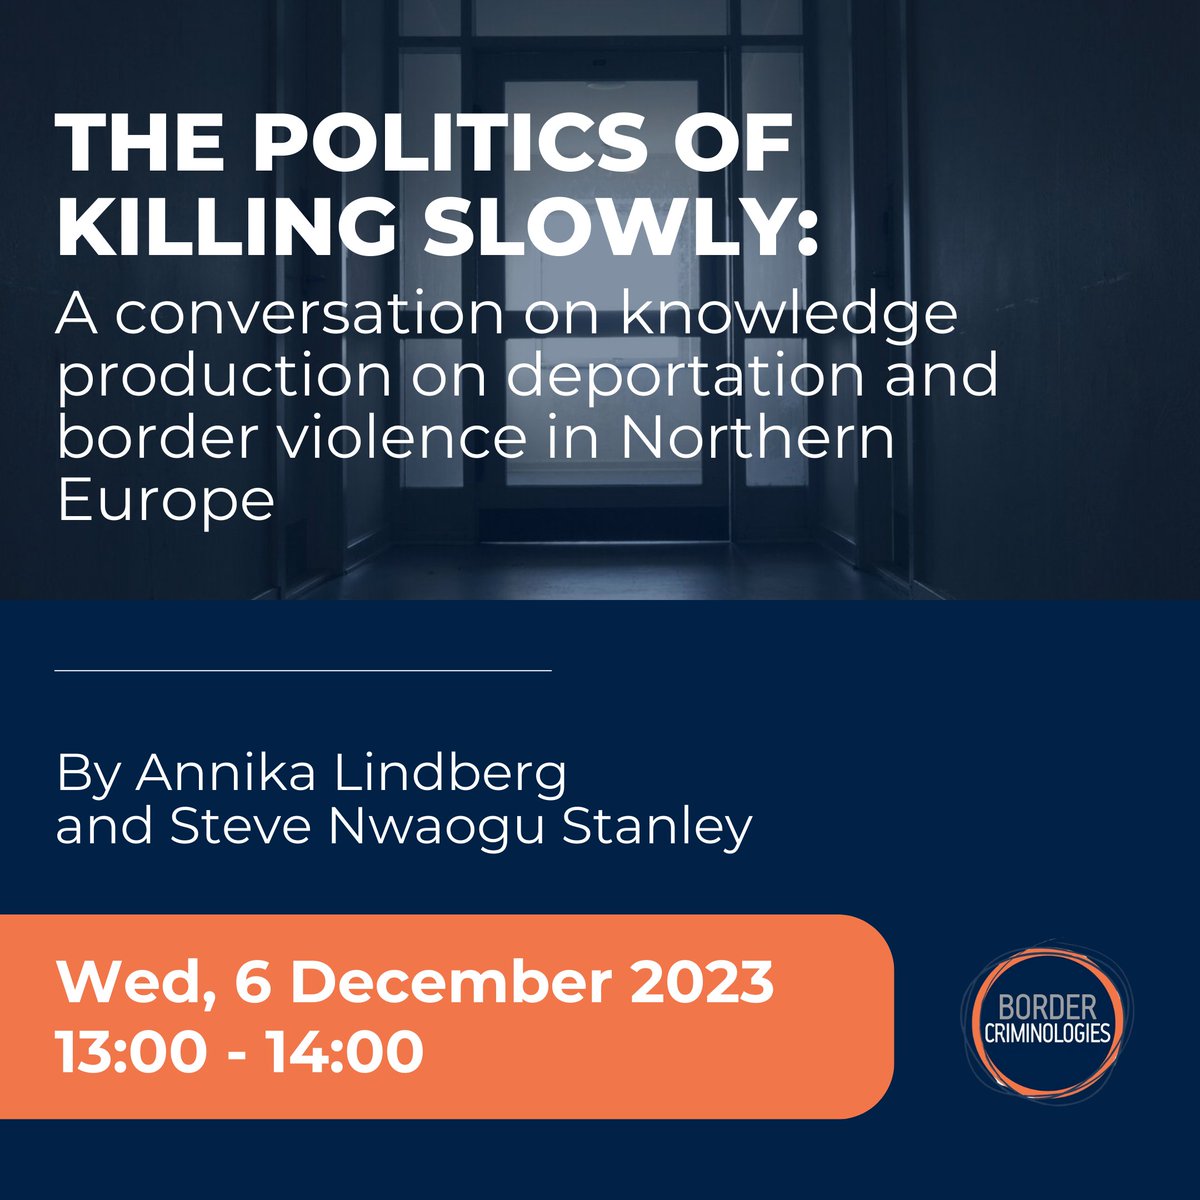 [Upcoming Event 🗓️] Dr. @ElinAnnika and Steve Nwaogu Stanley will talk about the state practices deployed by Nordic welfare states to contain, pressure, and deport people, different efforts to challenge this political regime, and more. Sign up here: law.ox.ac.uk/content/event/…